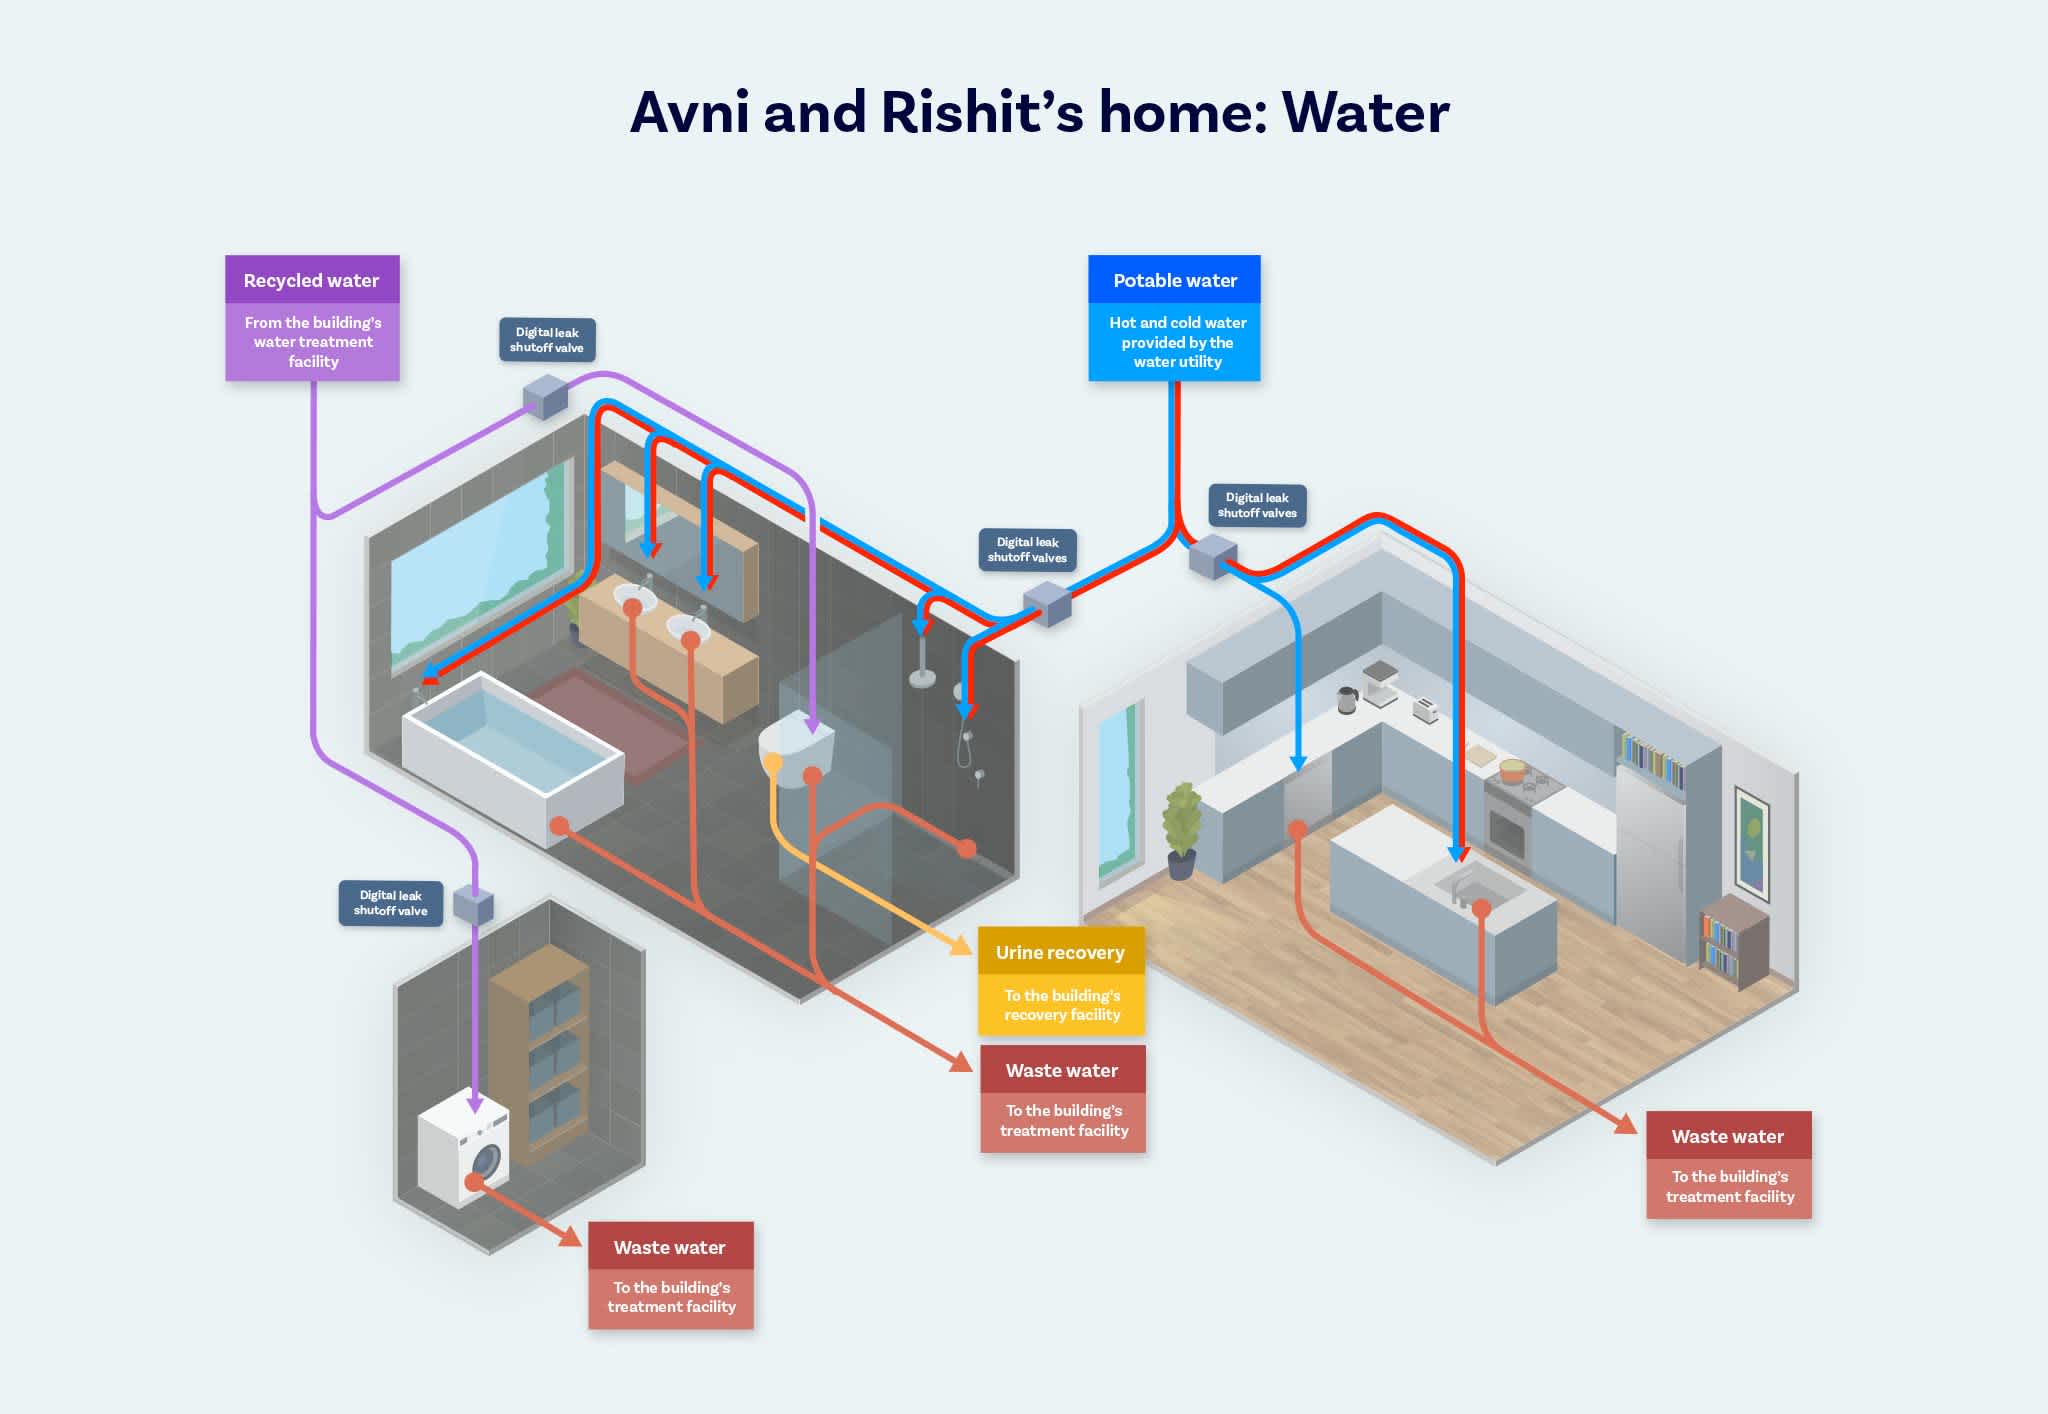 Avni and Rishit’s home: water